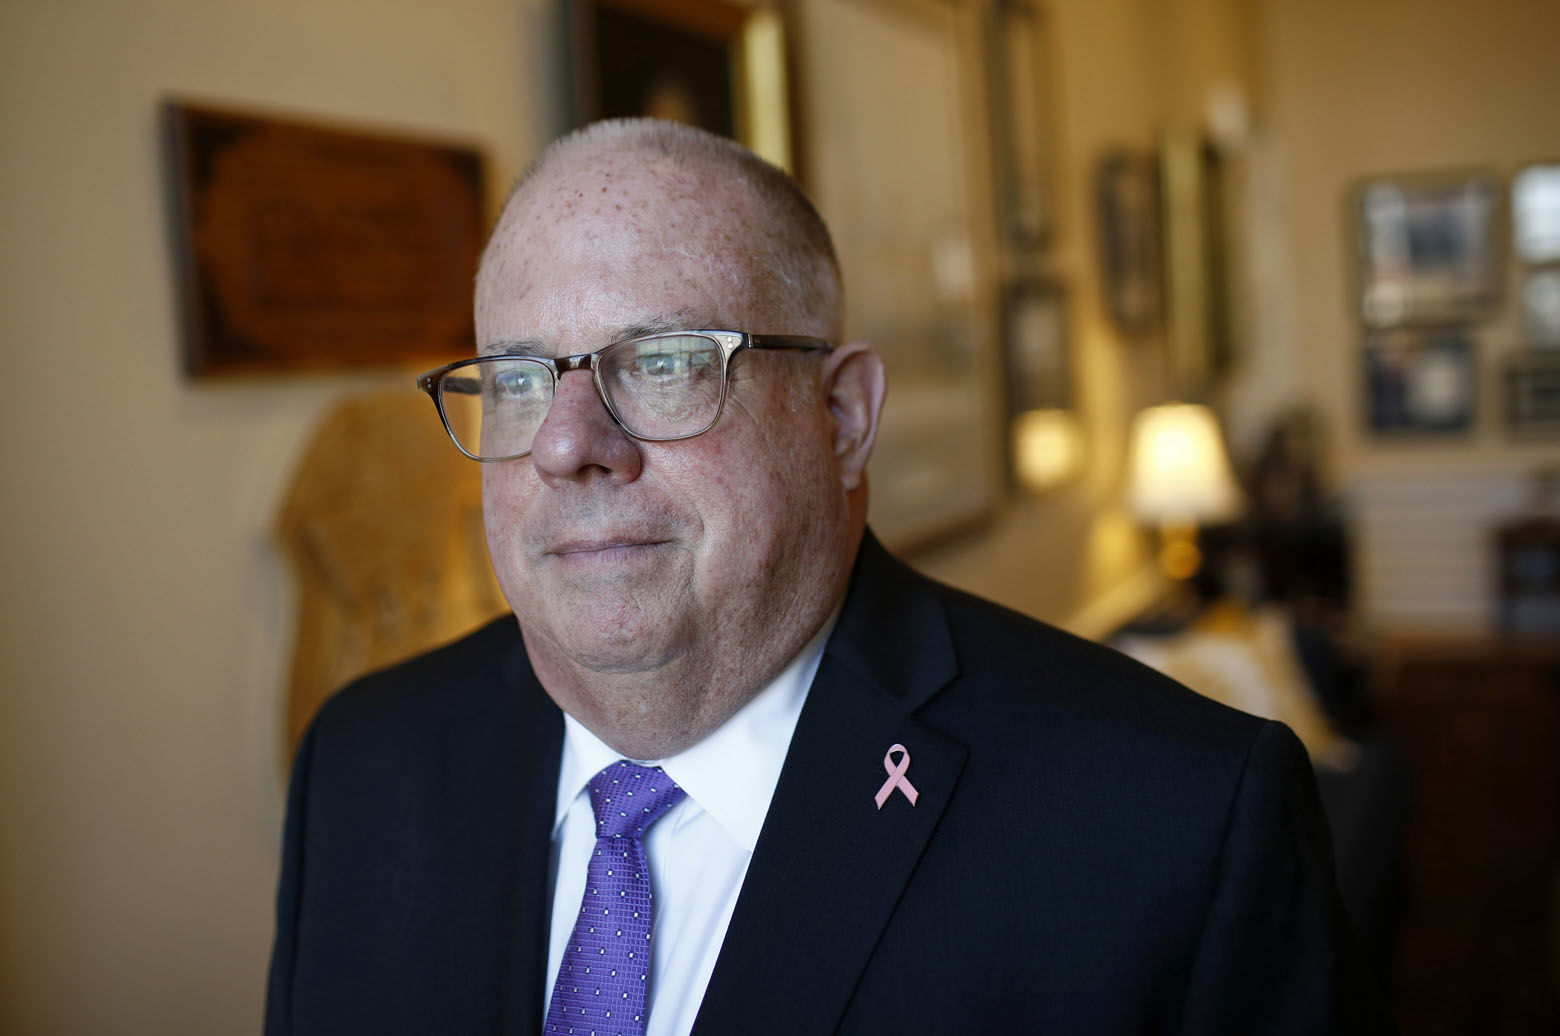 FILE - In this Oct. 25, 2018 file photo, Maryland Gov. Larry Hogan poses for a photograph after an interview with The Associated Press in his office at the Maryland State House in Annapolis, Md. Hogan is running for re-election against Democratic candidate Ben Jealous. (AP Photo/Patrick Semansky, File)